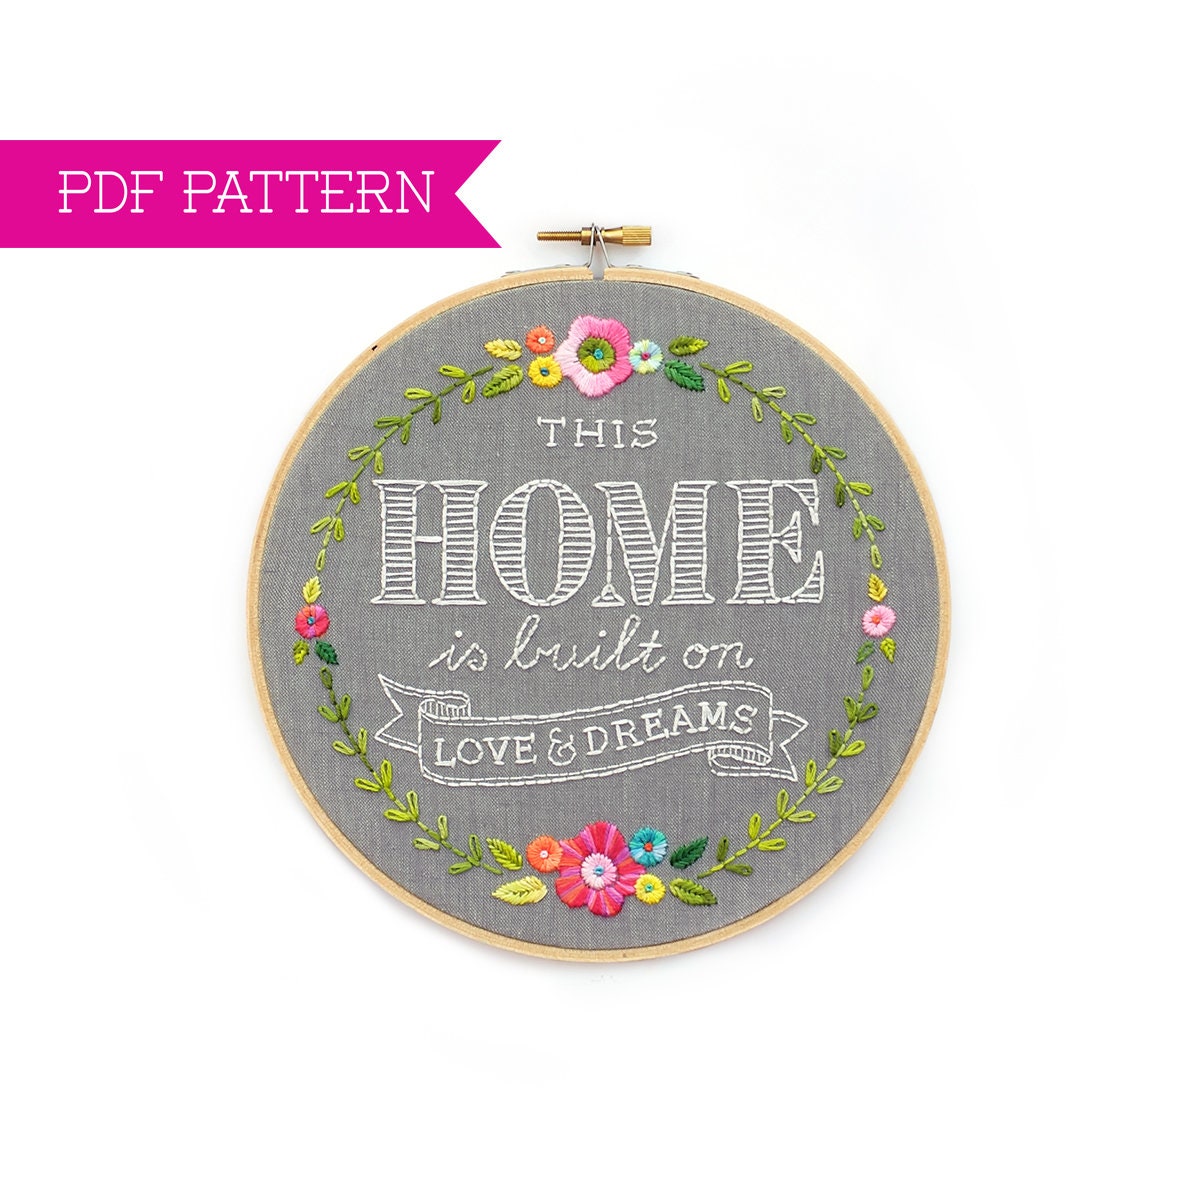 Air Tag In the Hoop Embroidery Design Print - Creative Appliques